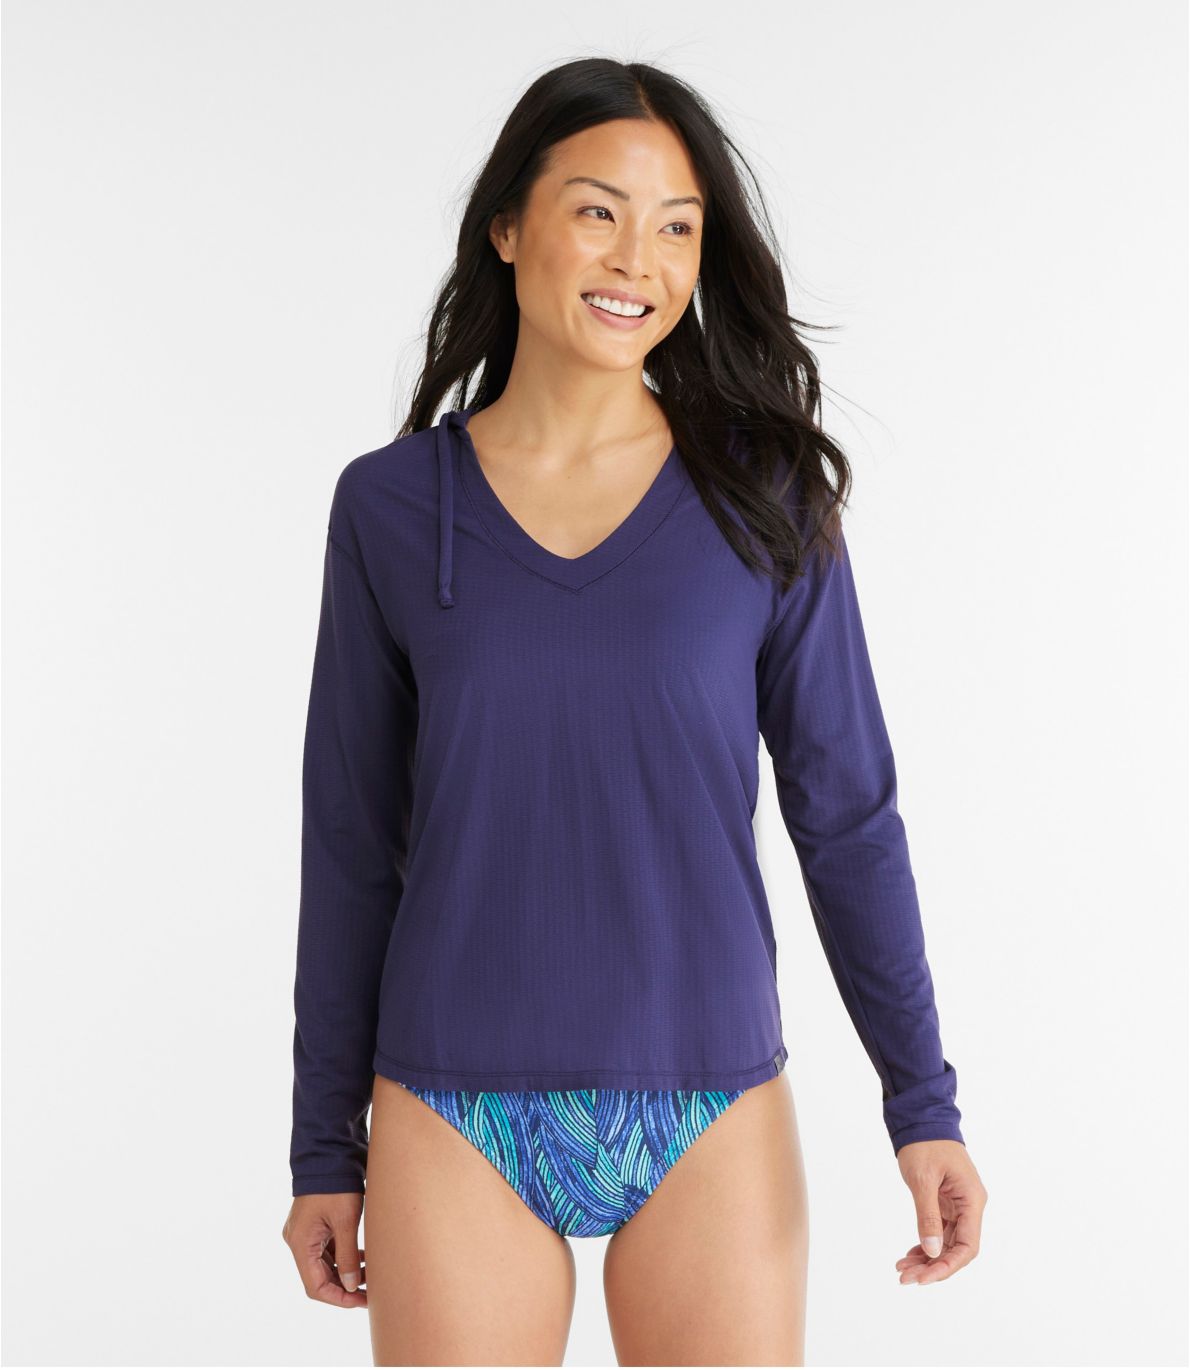 Women's Sand Beach Cover-Up, Hooded Pullover at L.L. Bean